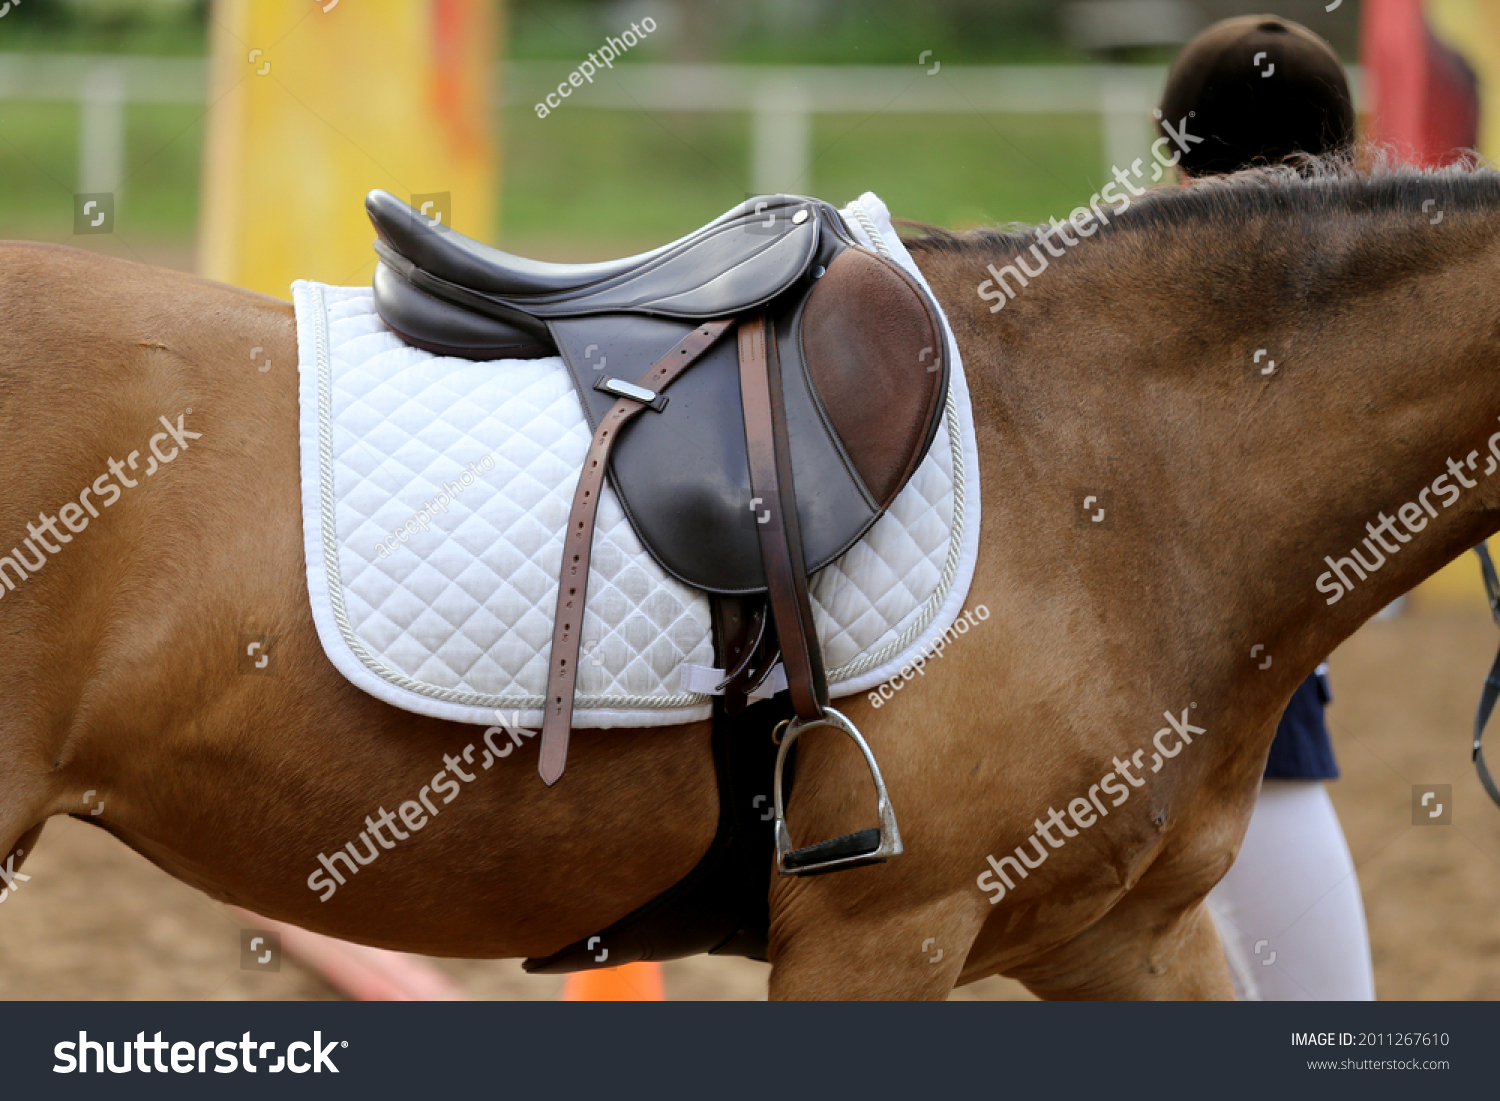 On the back of the horse, a brown leather saddle and saddle cloth are worn on top. Illuminated by sunlight ready for equestrian training outdoor #2011267610